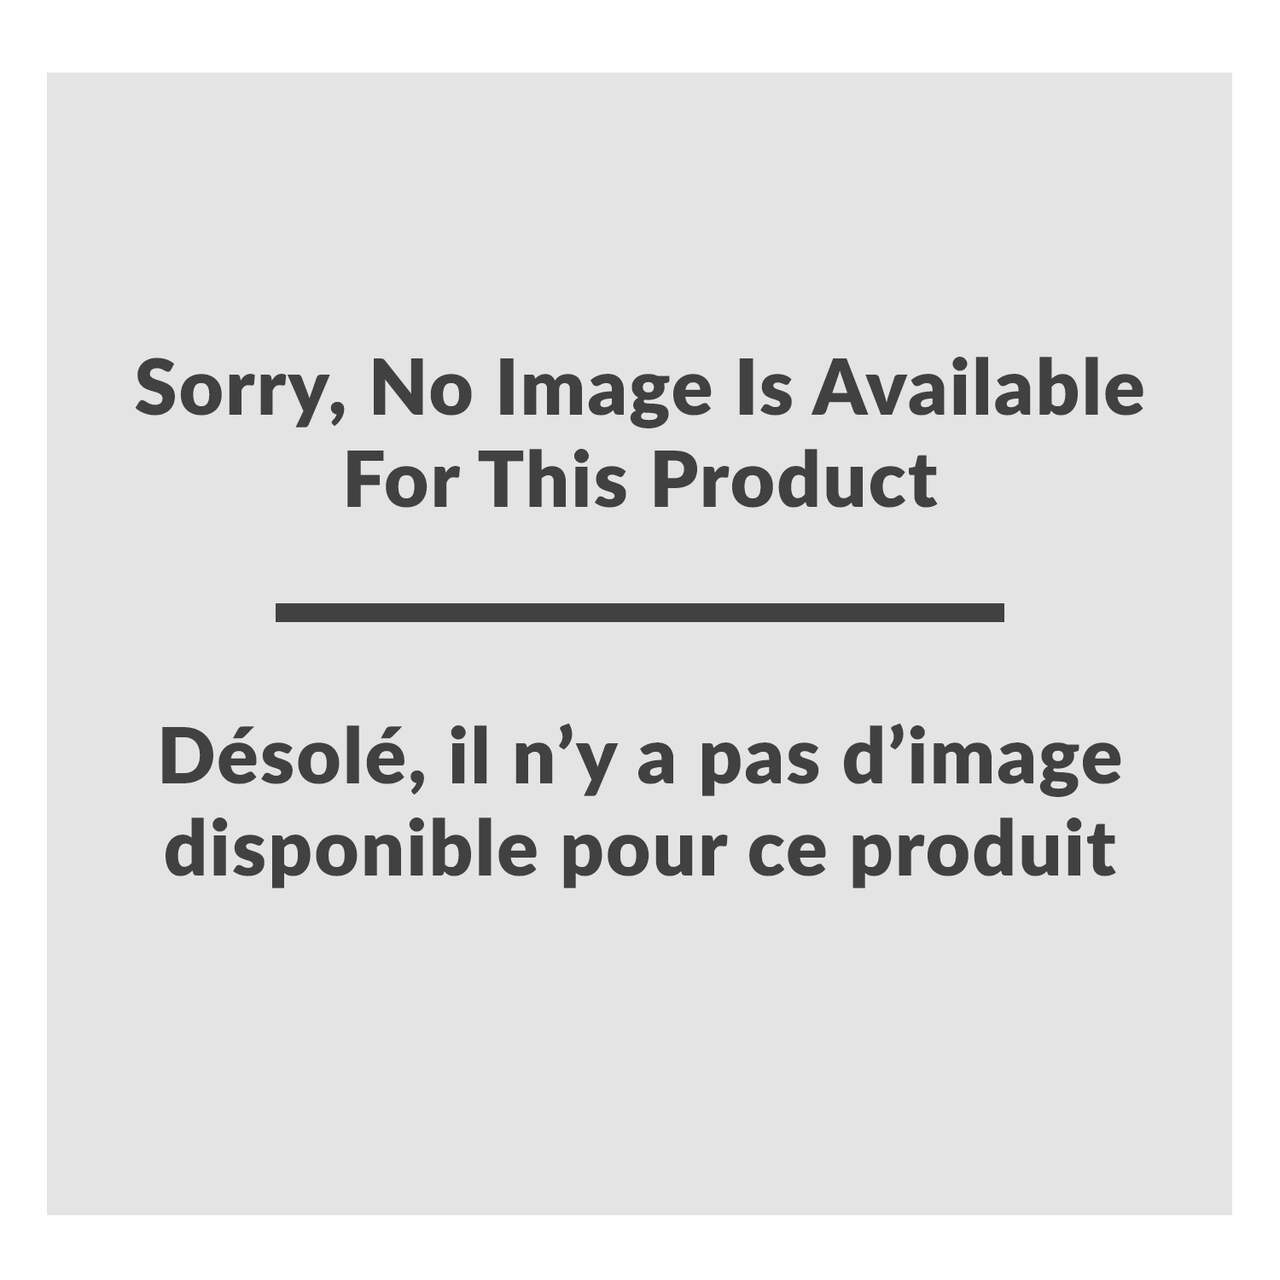 https://media-www.canadiantire.ca/no_product_image_available.png?imdensity=1&imwidth=640&impolicy=mZoom